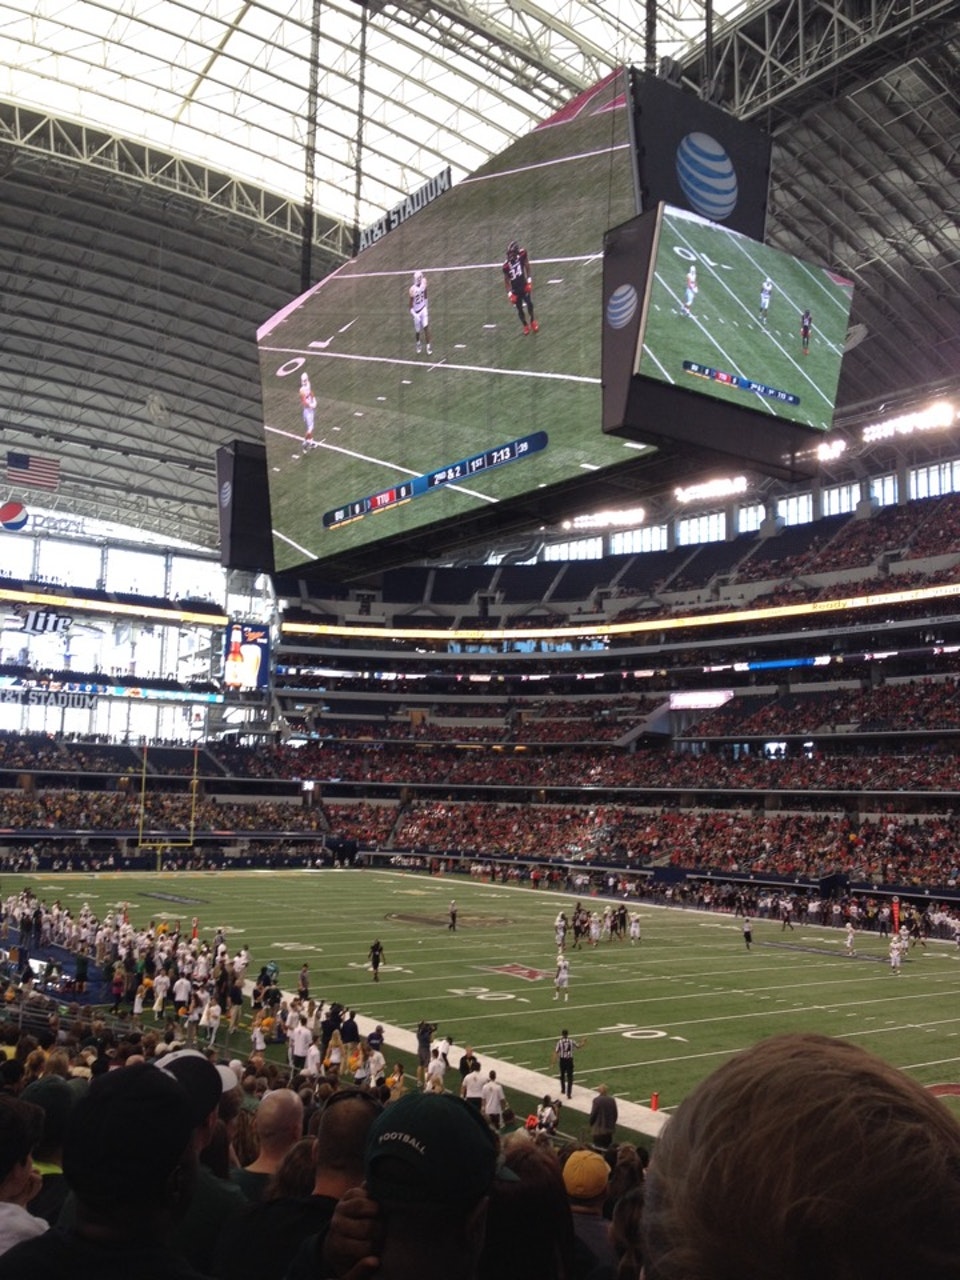 section 103, row 19 seat view  for football - at&t stadium (cowboys stadium)